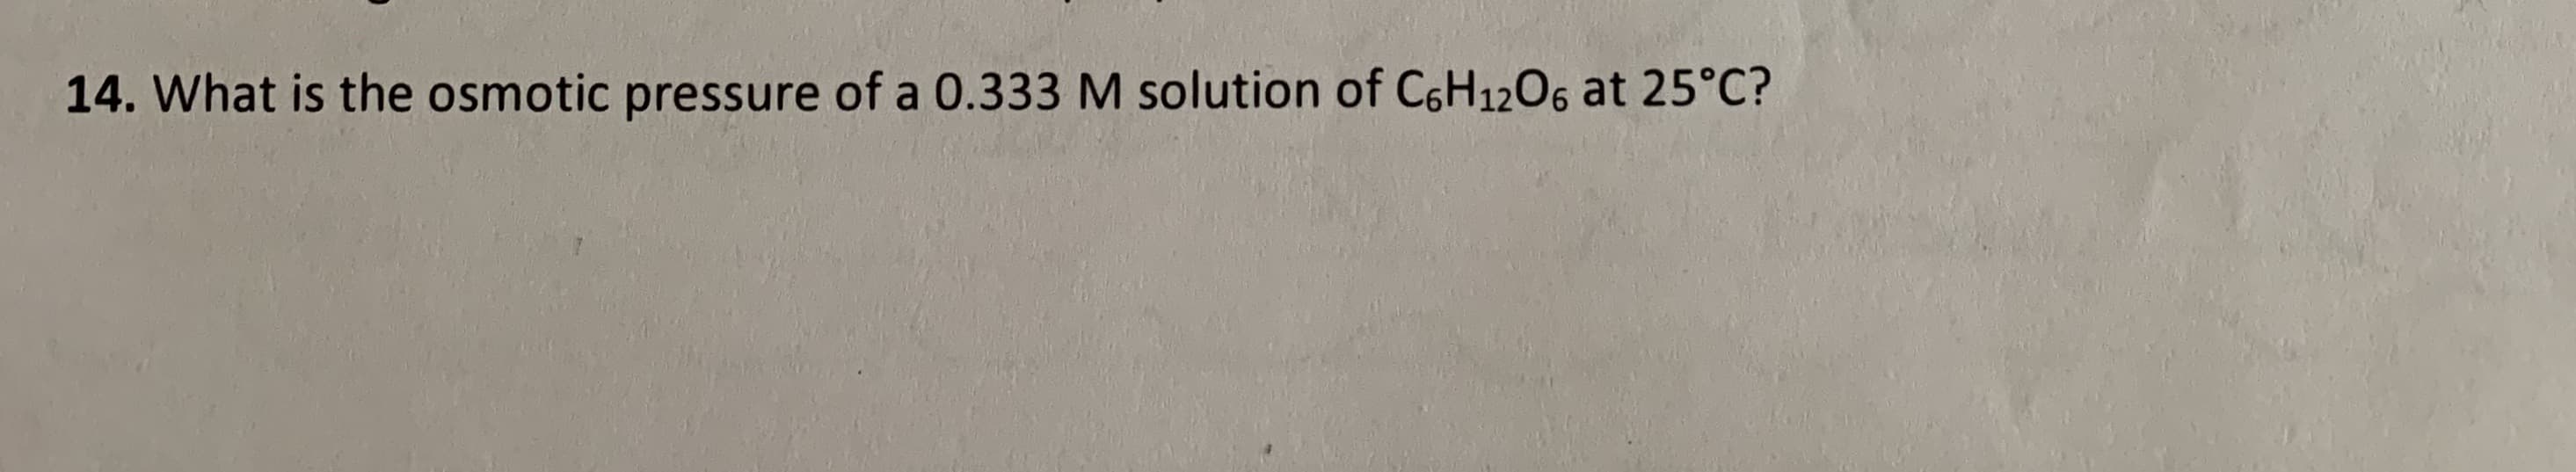 14. What is the osmotic pressure of a 0.333 M solution of C6H1206 at 25°C?
